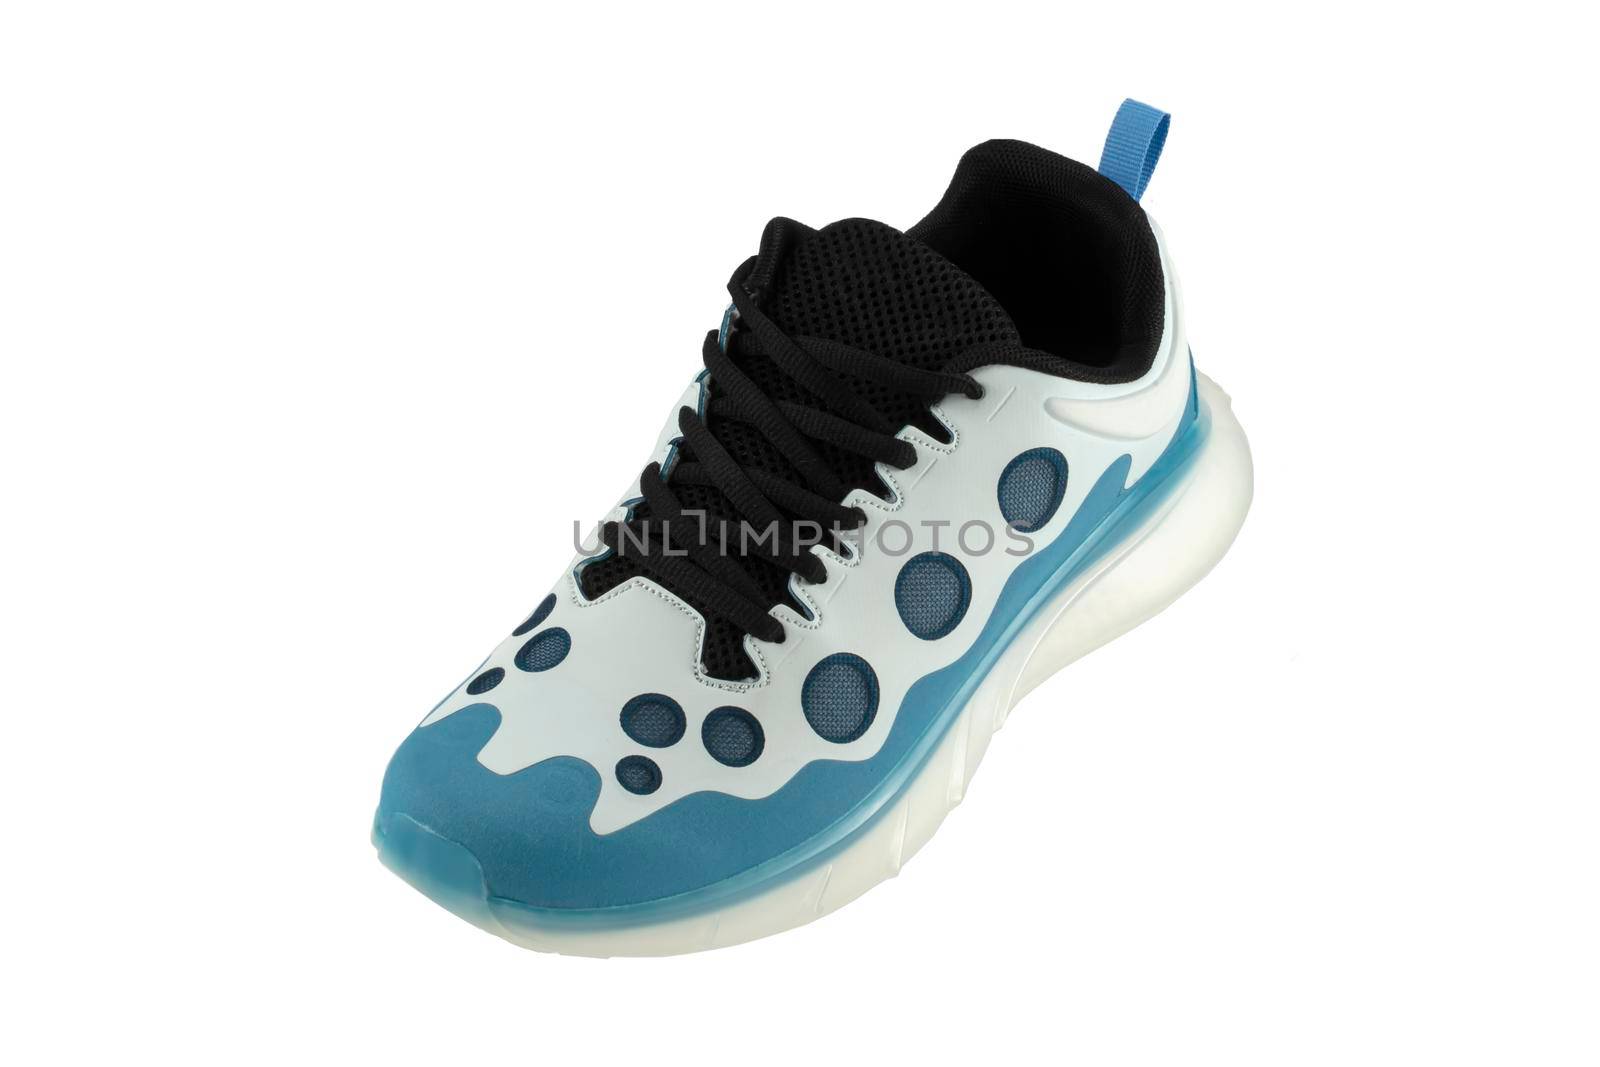 Blue sneakers with black inserts isolated on white background.